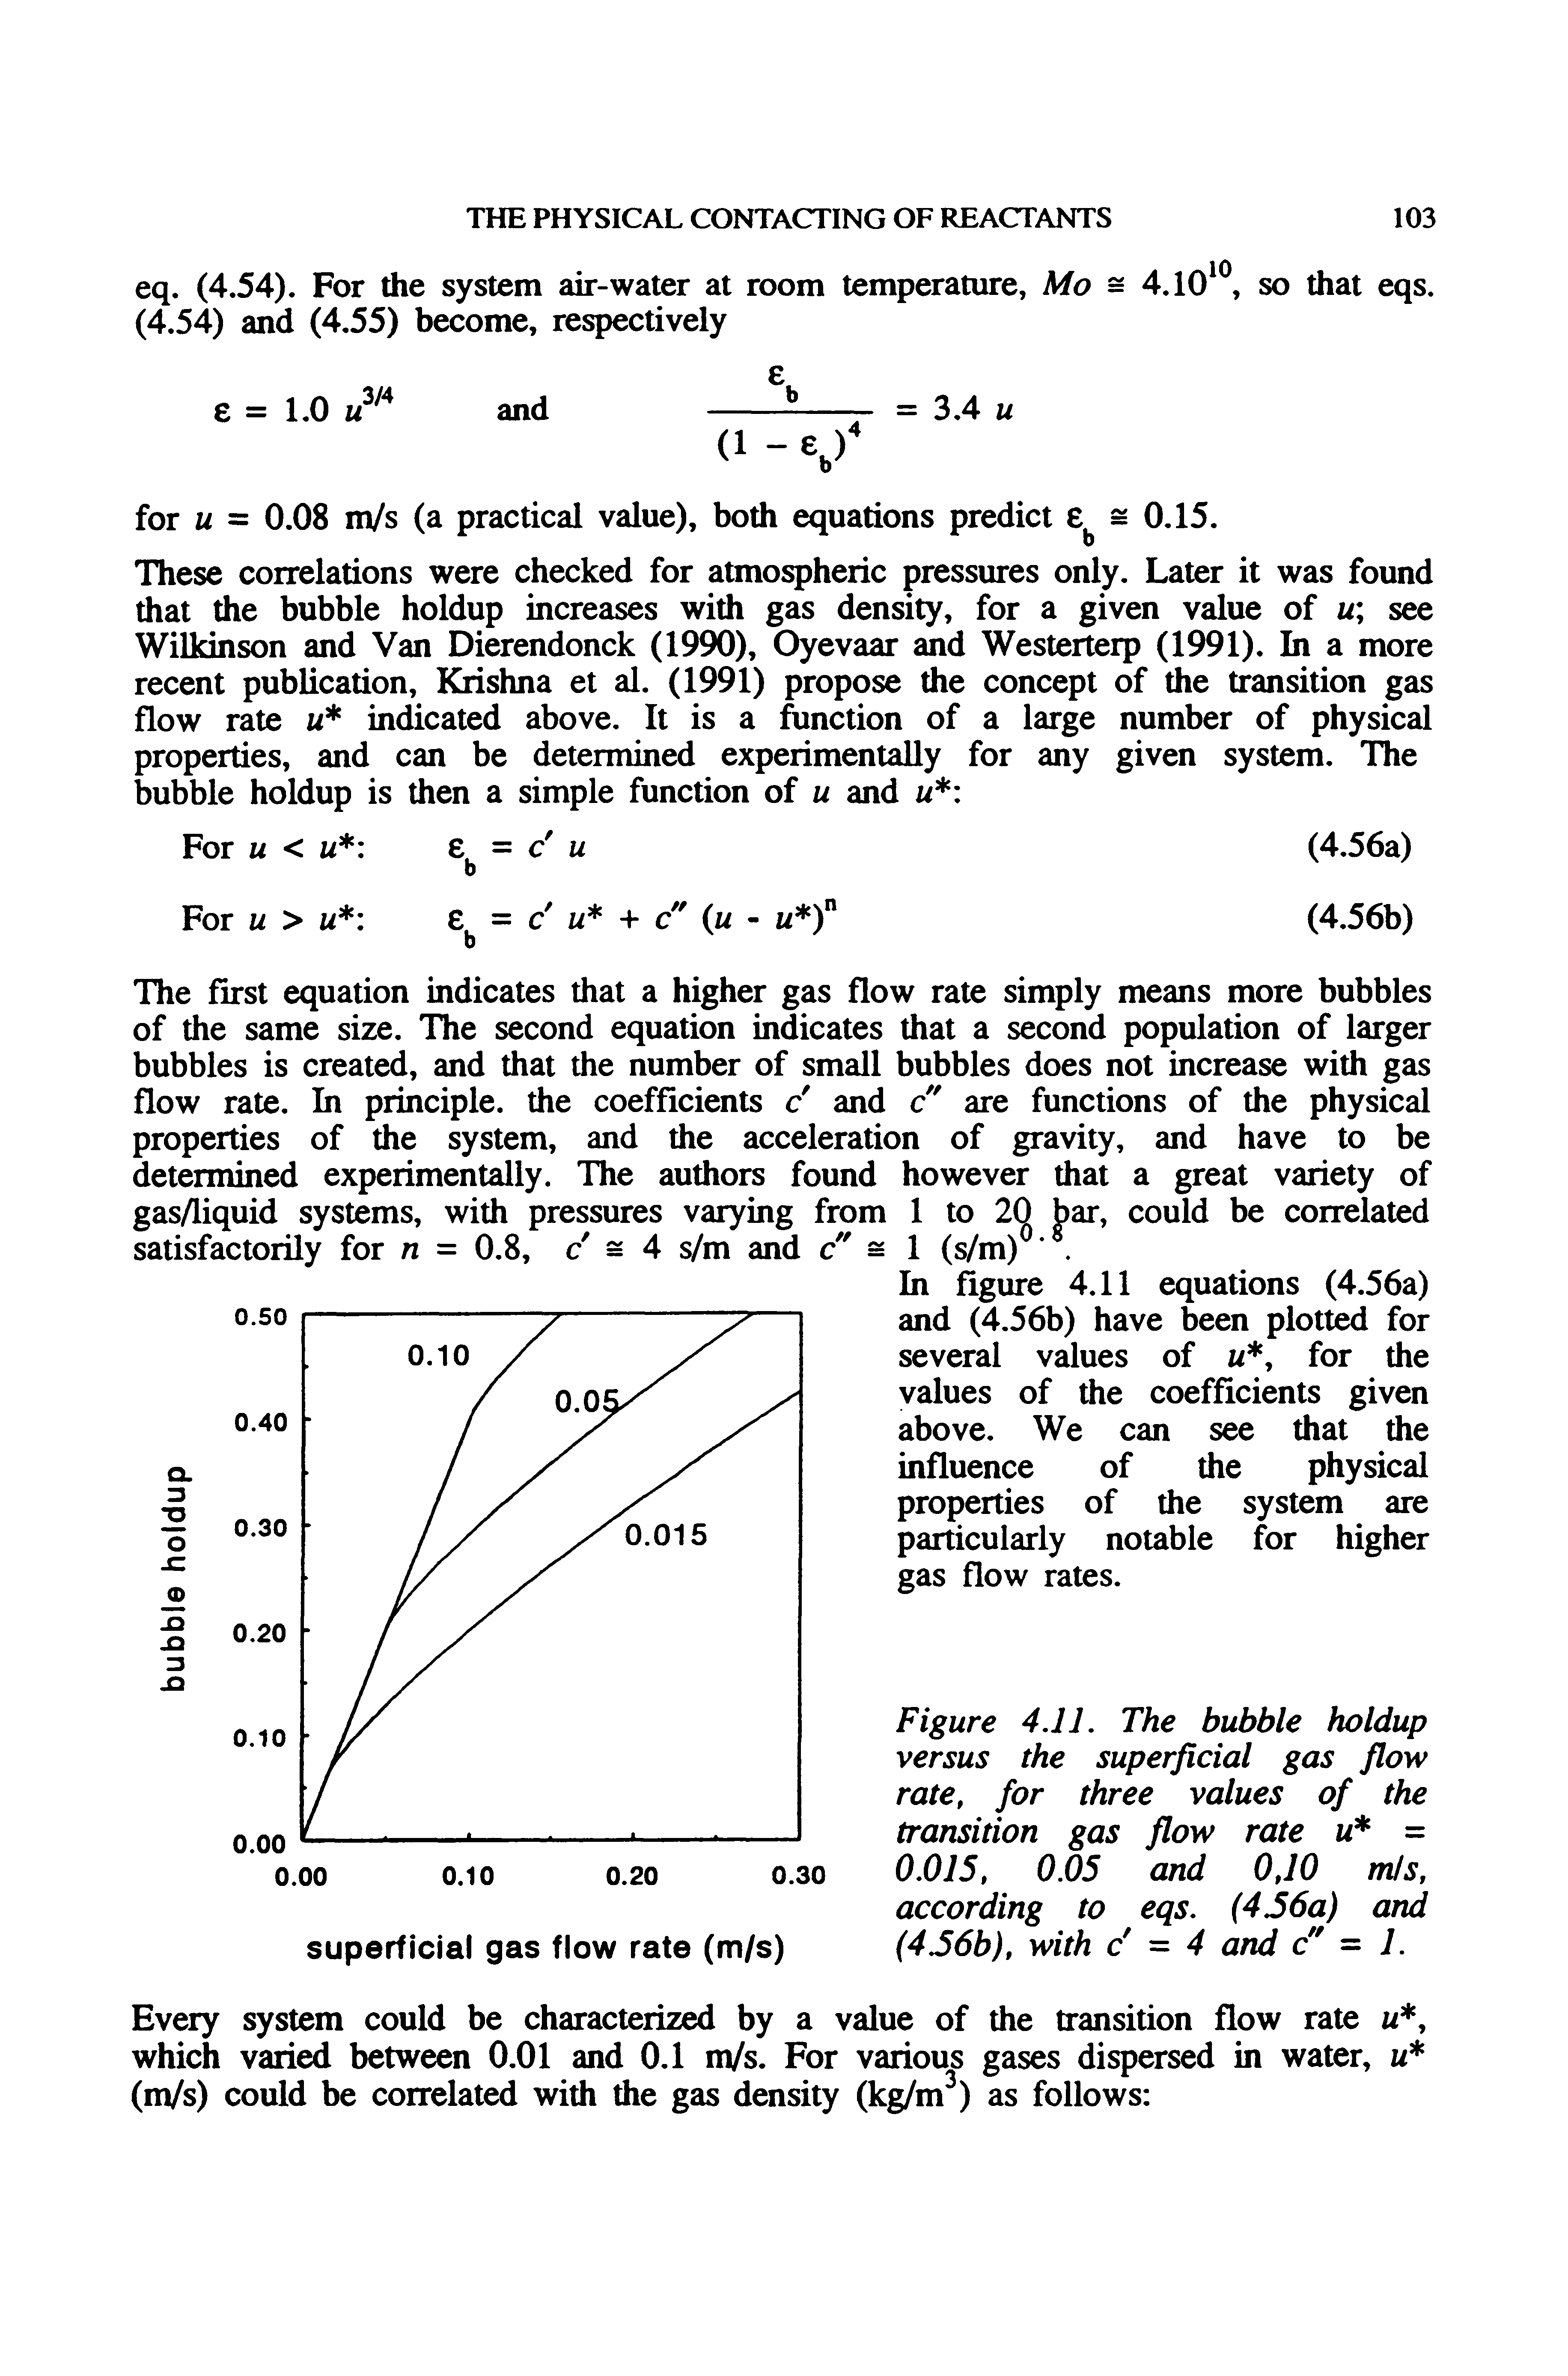 Figure 4.11. The bubble holdup versus the superficial gas flow rate, for three values of the transition gas flow rate u = 0.015, 0.05 and 0,10 m/s,...